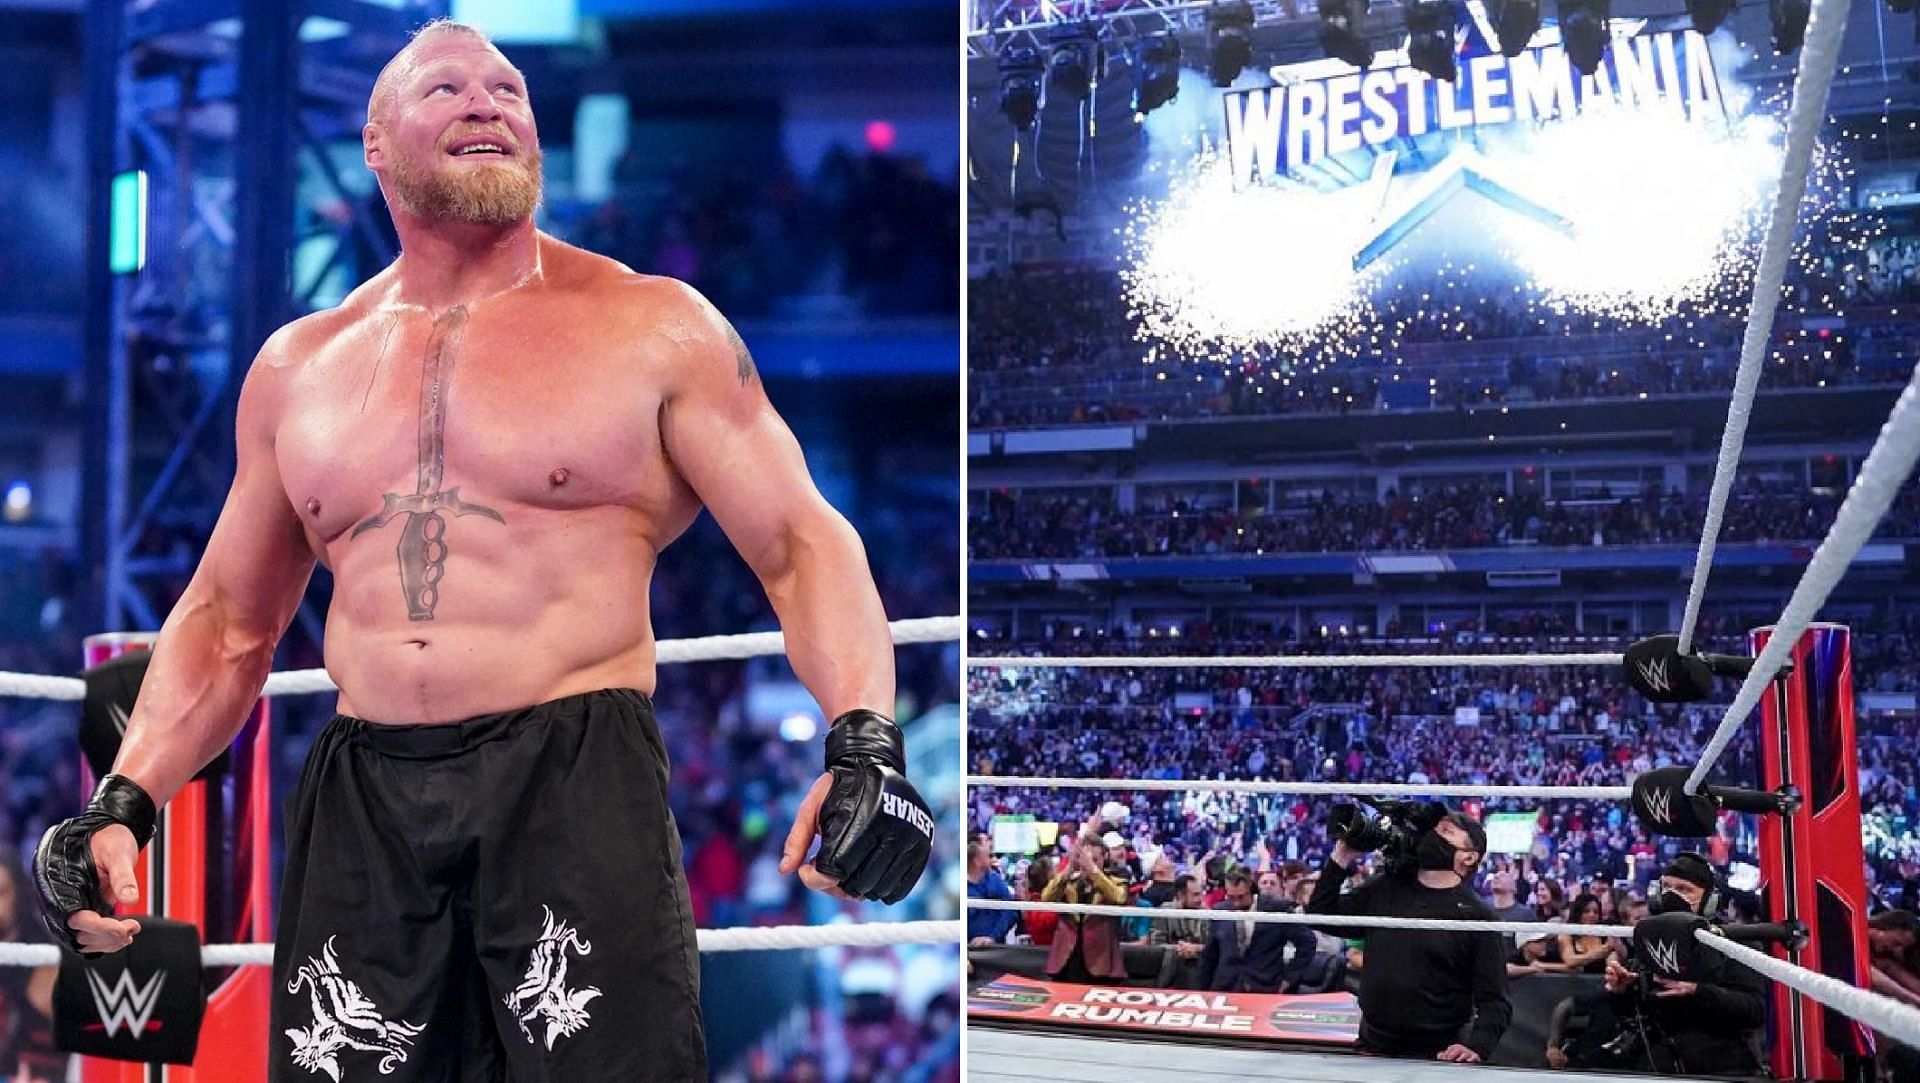 Brock Lesnar is heading to the main event of WrestleMania 38